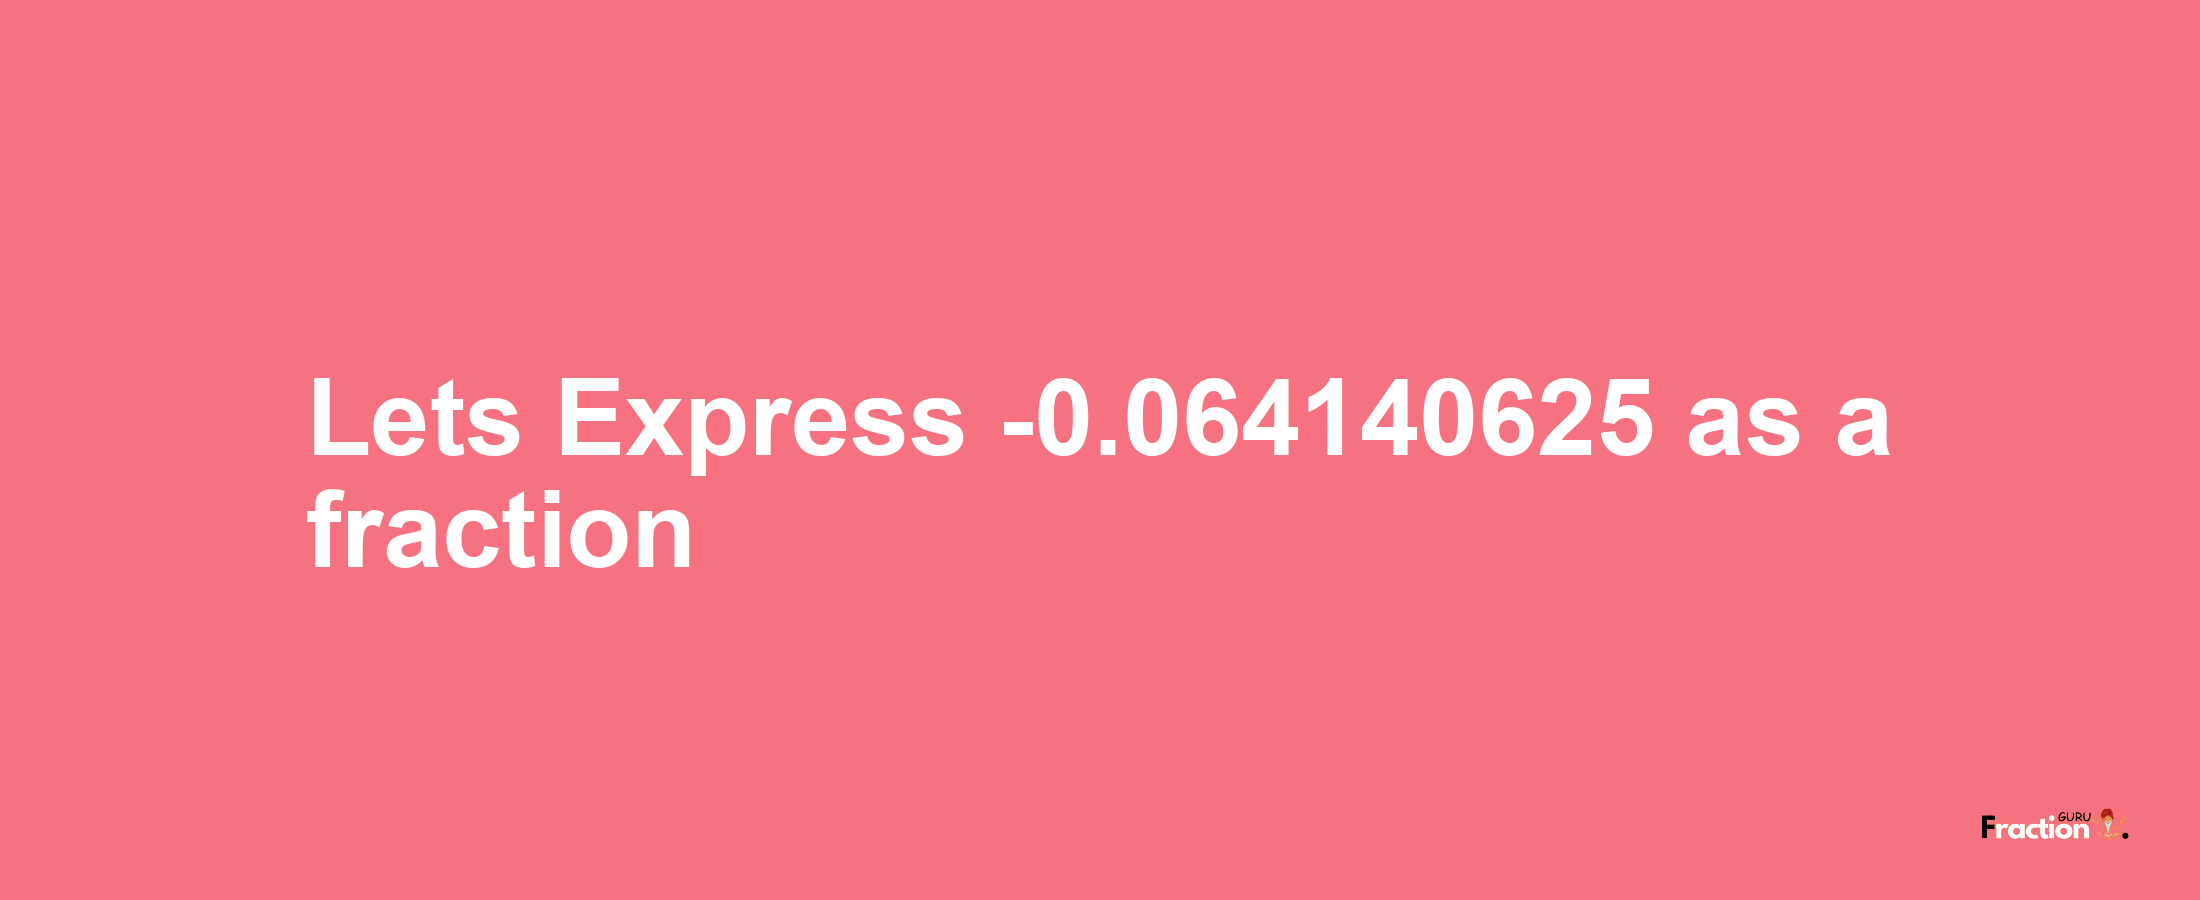 Lets Express -0.064140625 as afraction